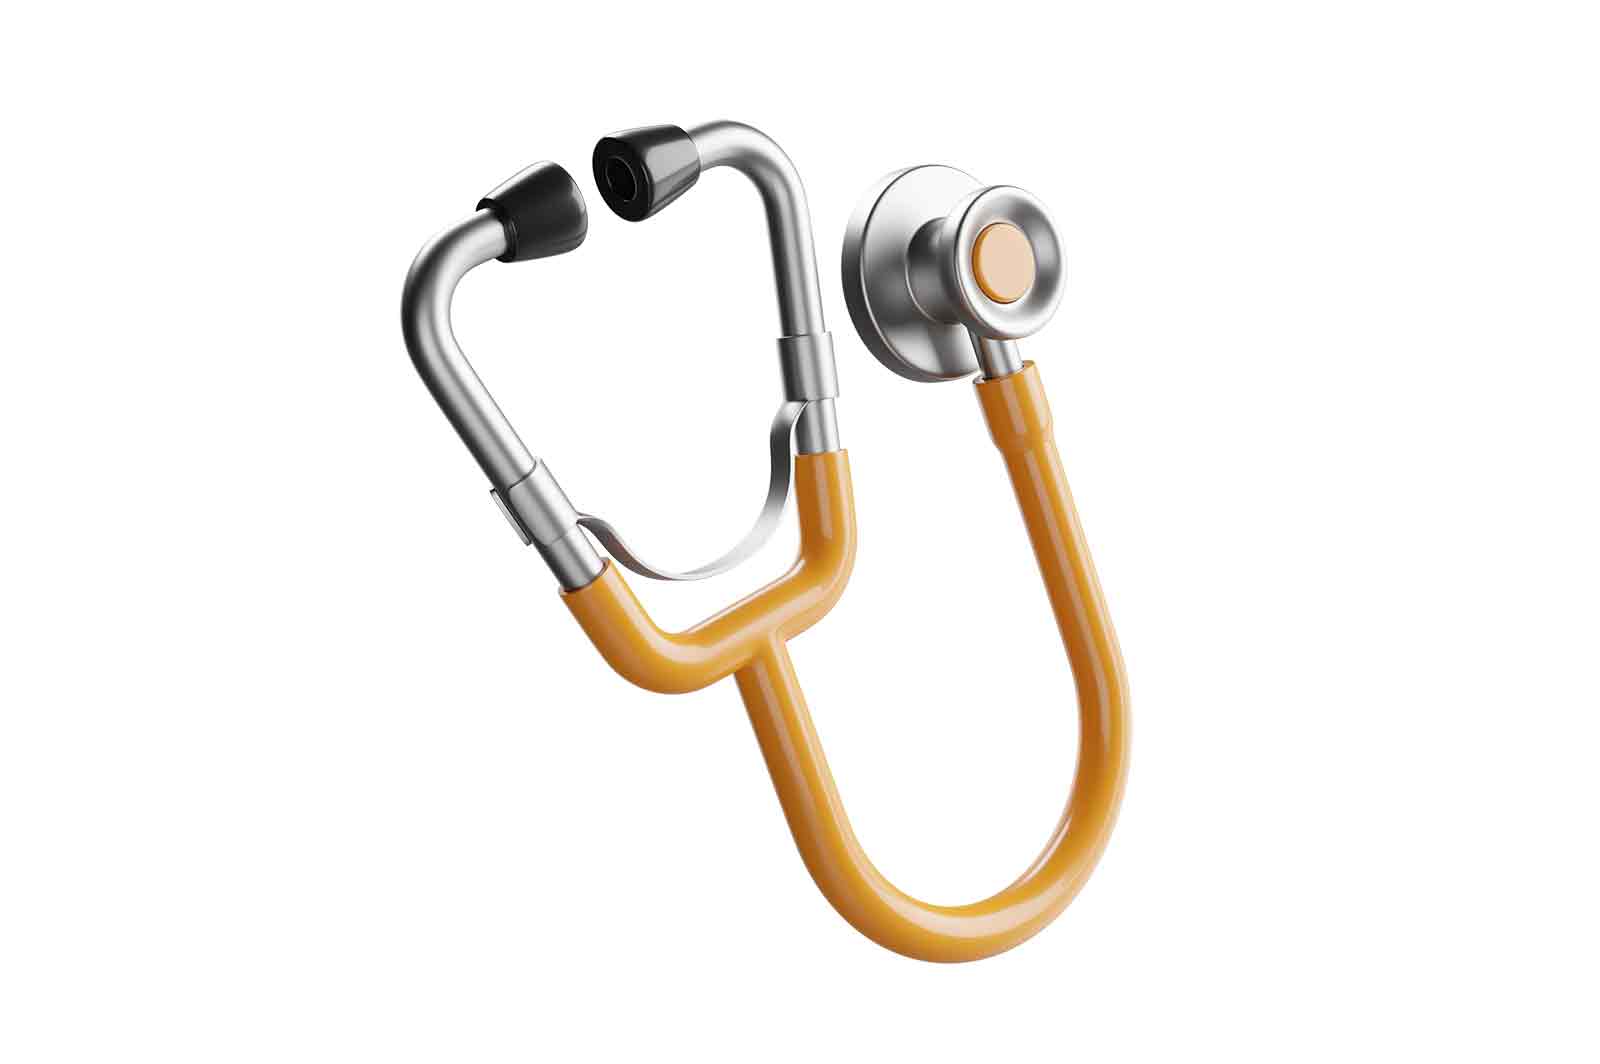 Orange stethoscope on white background, 3d rendered illustration. Medical instrument for listening to the sounds of the heart and lungs.